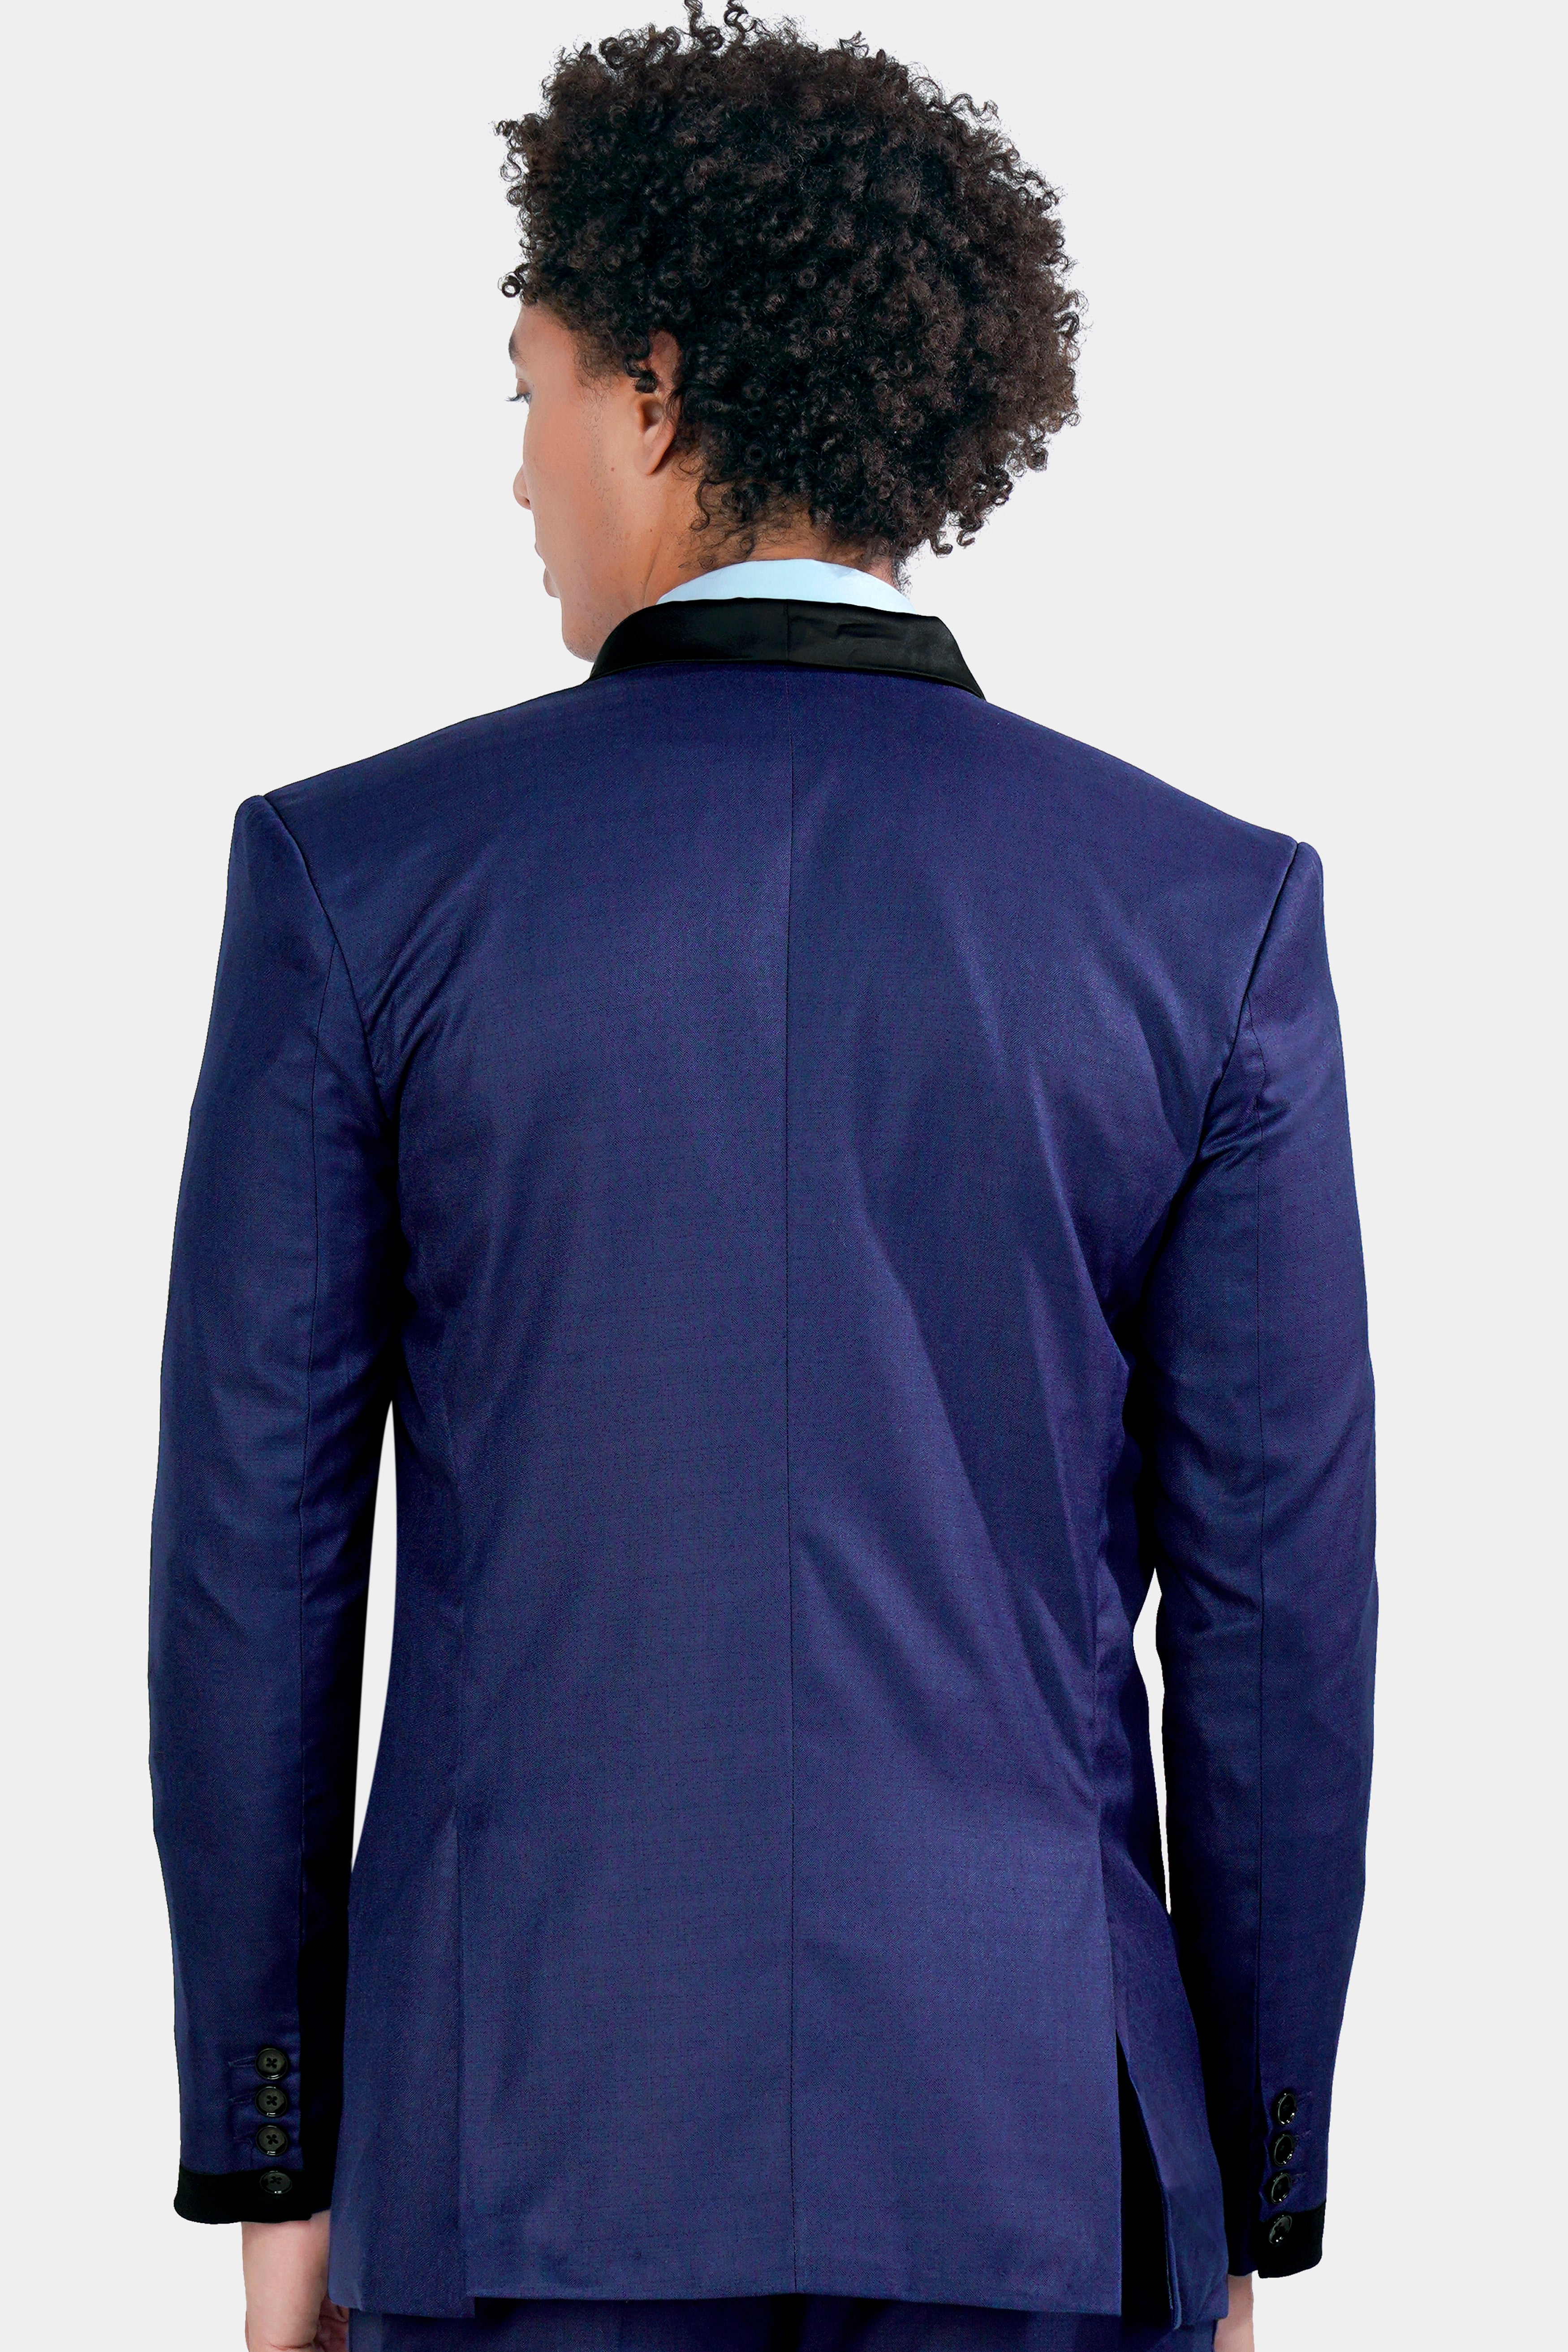 Cloud Burst Blue Wool Rich Double Breasted Tuxedo Designer Blazer BL2946-DB-D6-36, BL2946-DB-D6-38, BL2946-DB-D6-40, BL2946-DB-D6-42, BL2946-DB-D6-44, BL2946-DB-D6-46, BL2946-DB-D6-48, BL2946-DB-D6-50, BL2946-DB-D6-52, BL2946-DB-D6-54, BL2946-DB-D6-56, BL2946-DB-D6-58, BL2946-DB-D6-60